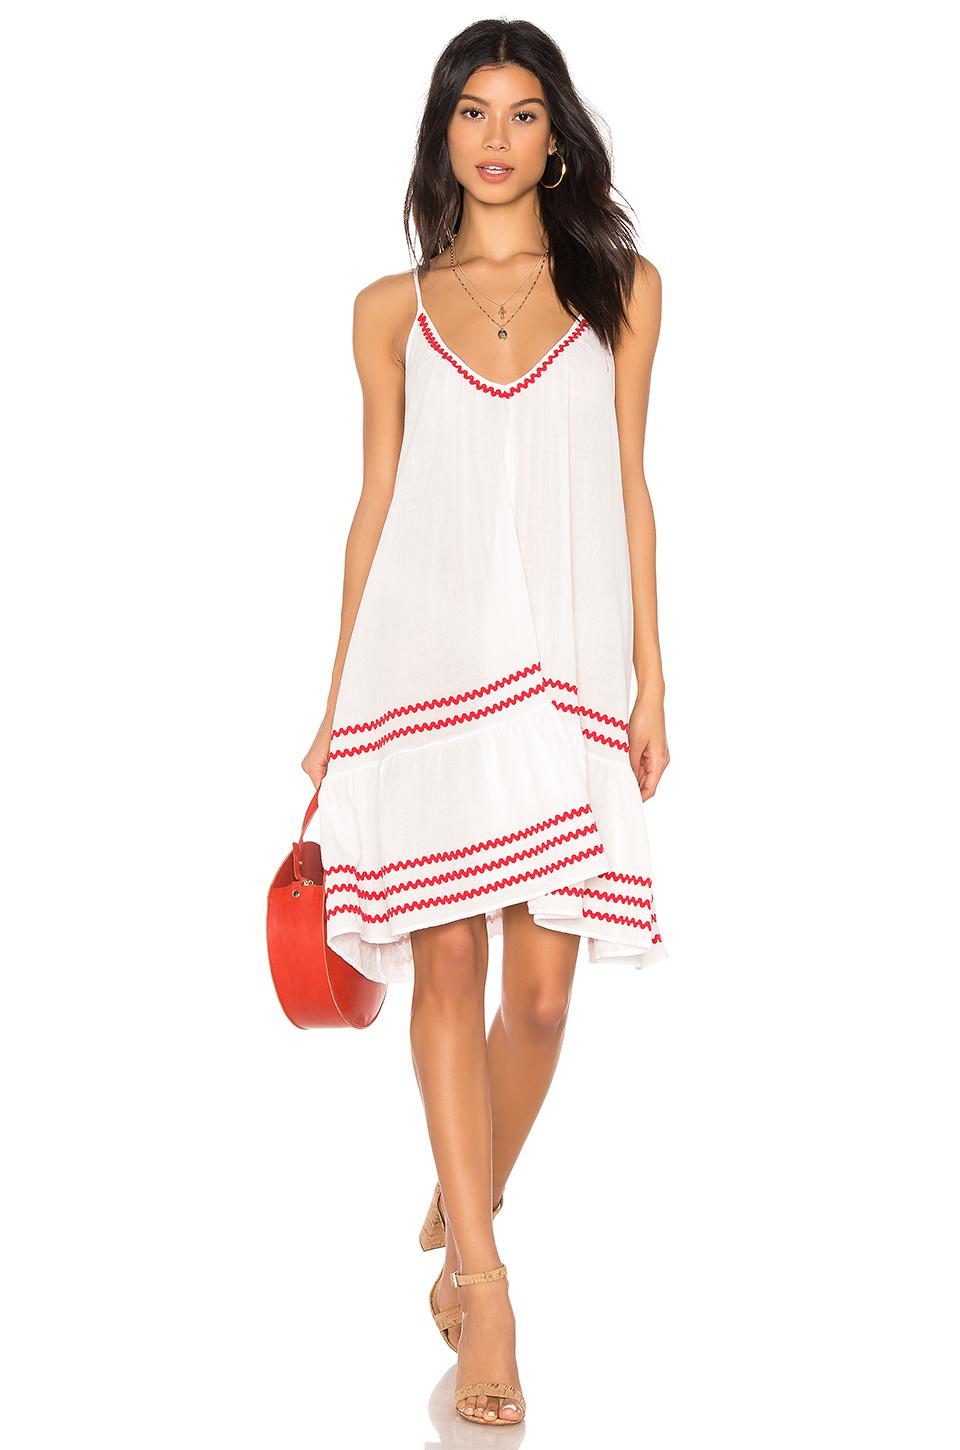 9seed Cotton St Tropez Ruffle Mini Dress in White & Red (White) - Lyst